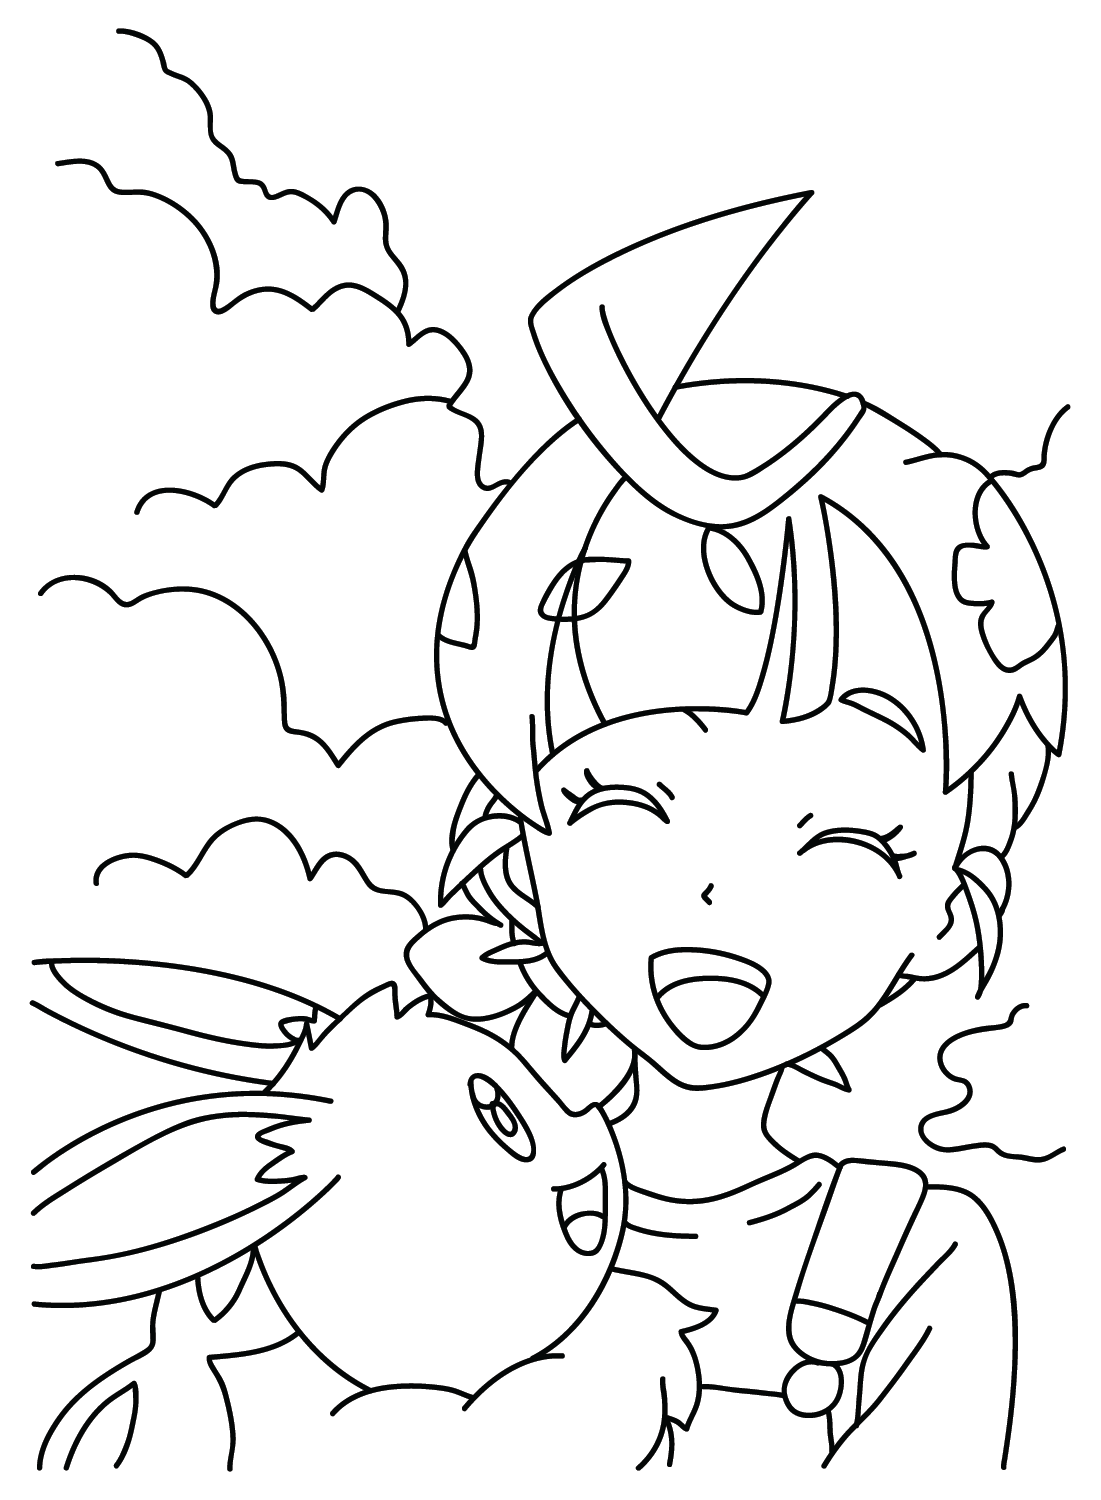 Chloe Cerise of Pokemon Coloring Page Images from Eevee